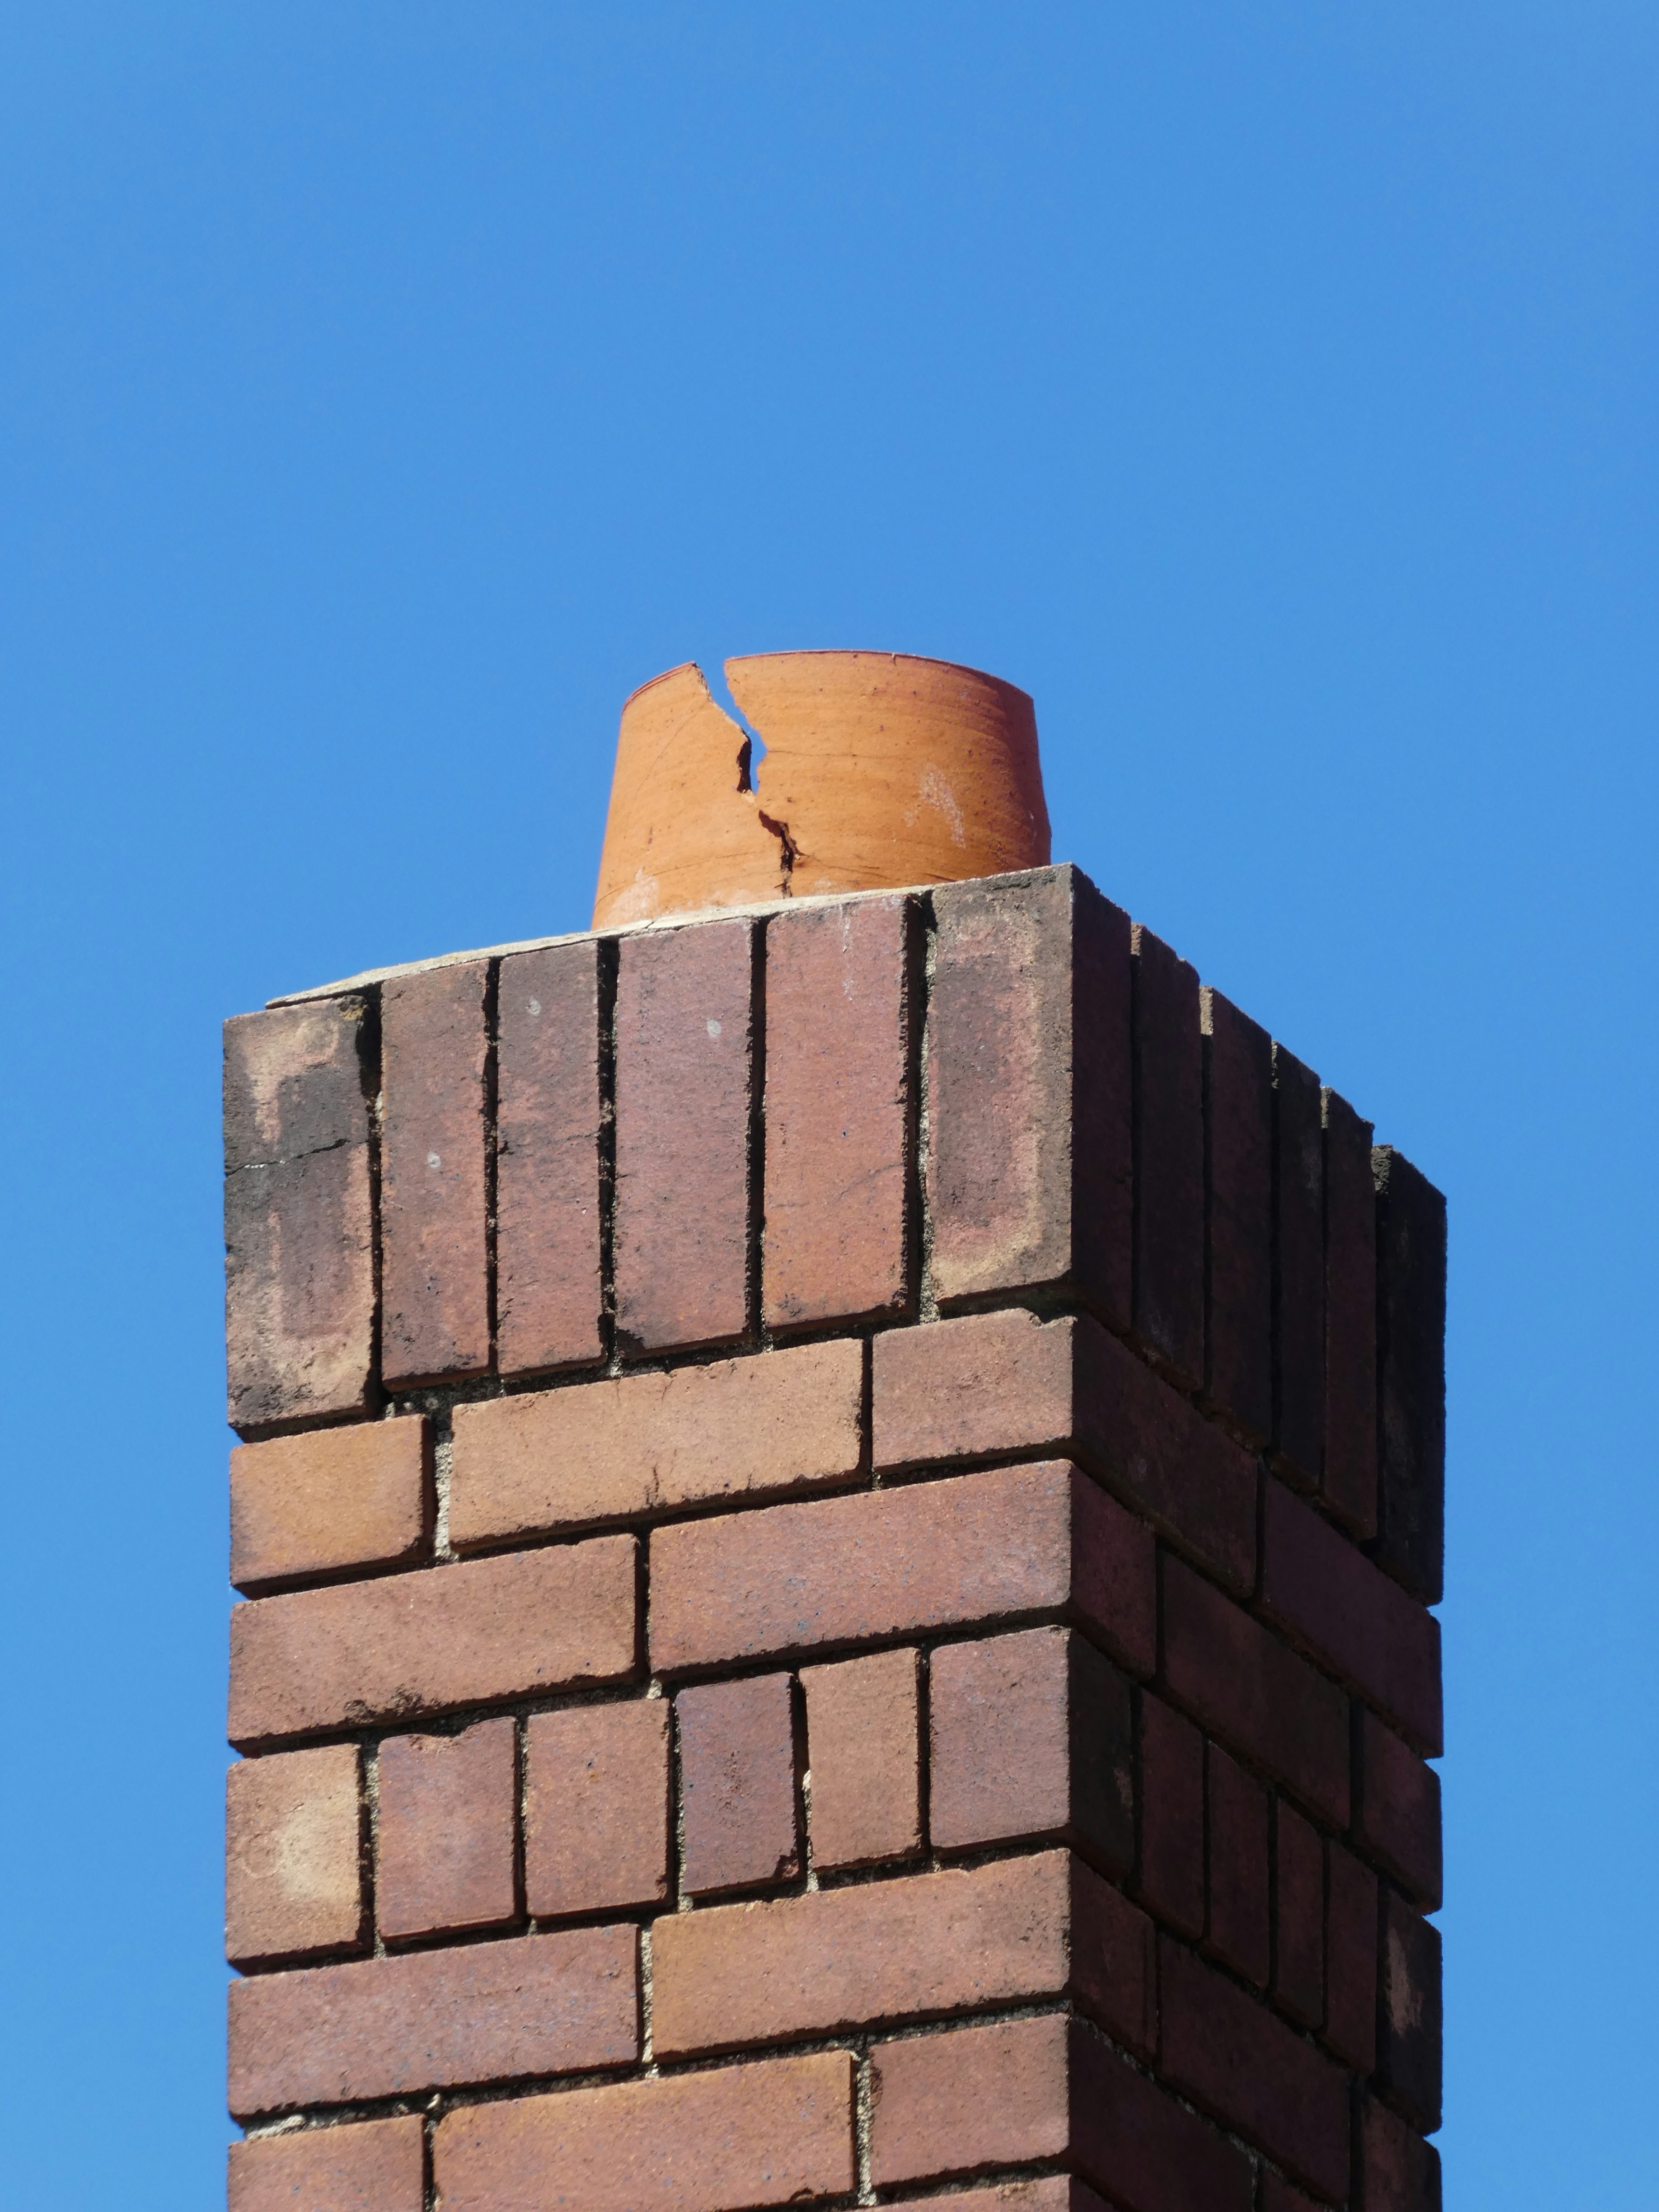 A chimney with a damaged crown and mortar joints